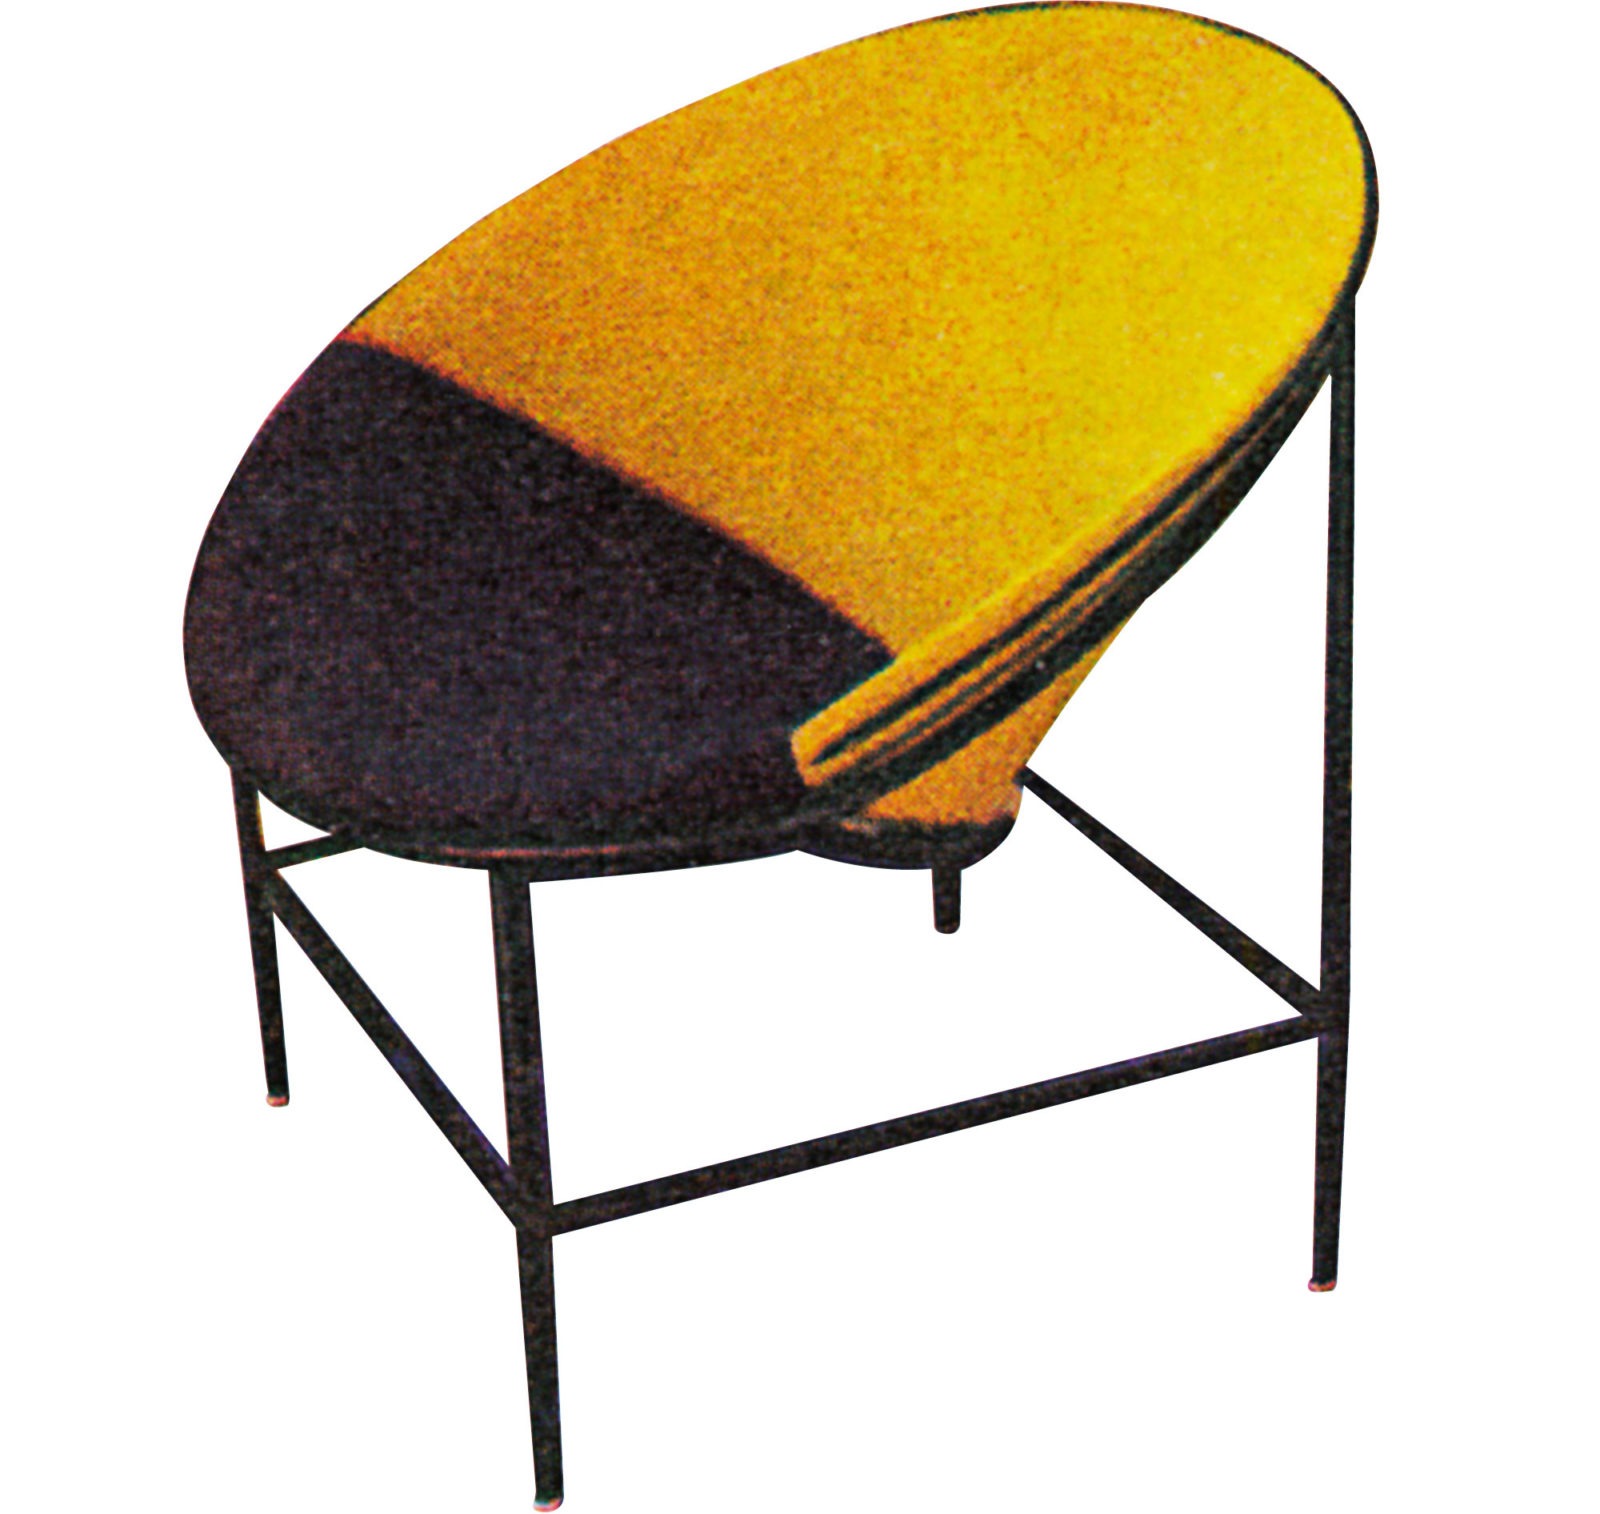 Steel tube armchair with egg-shaped seat in black and yellow wool fabric.